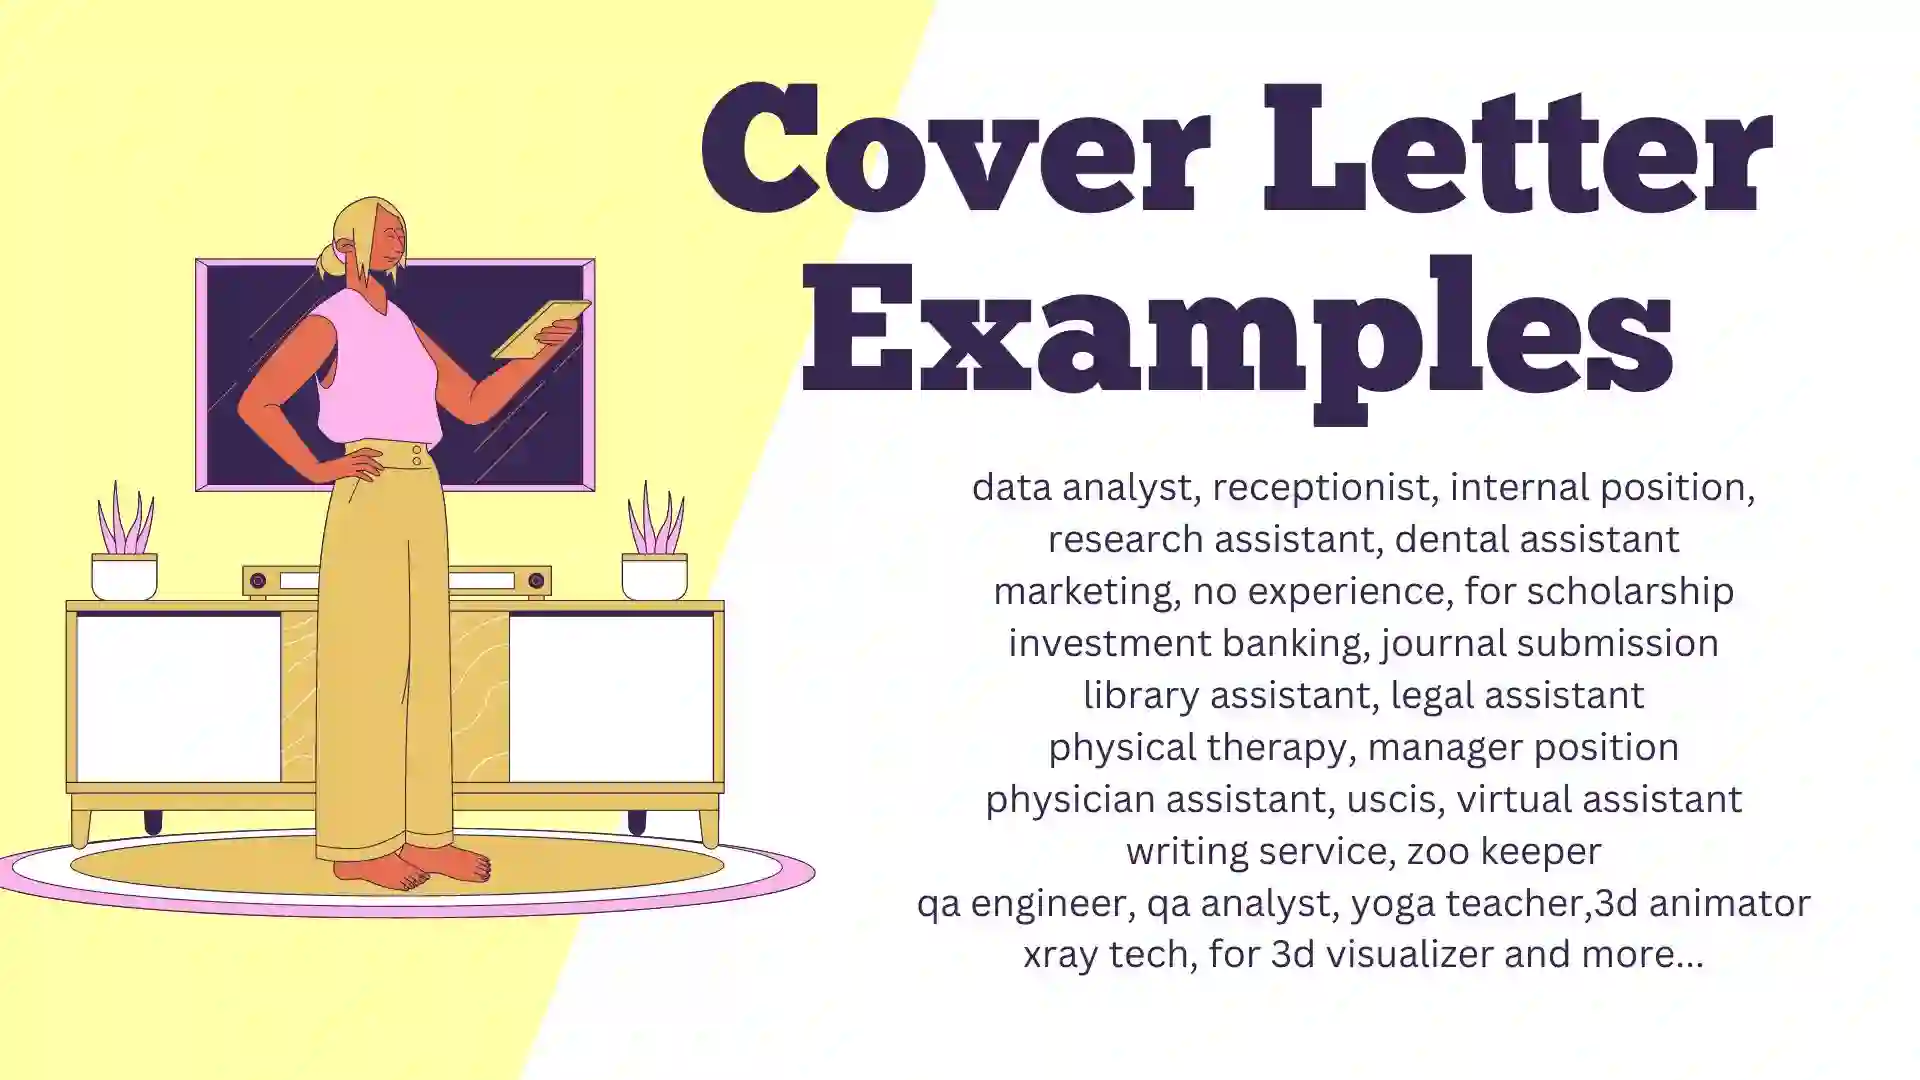 Cover Letter Examples.webp